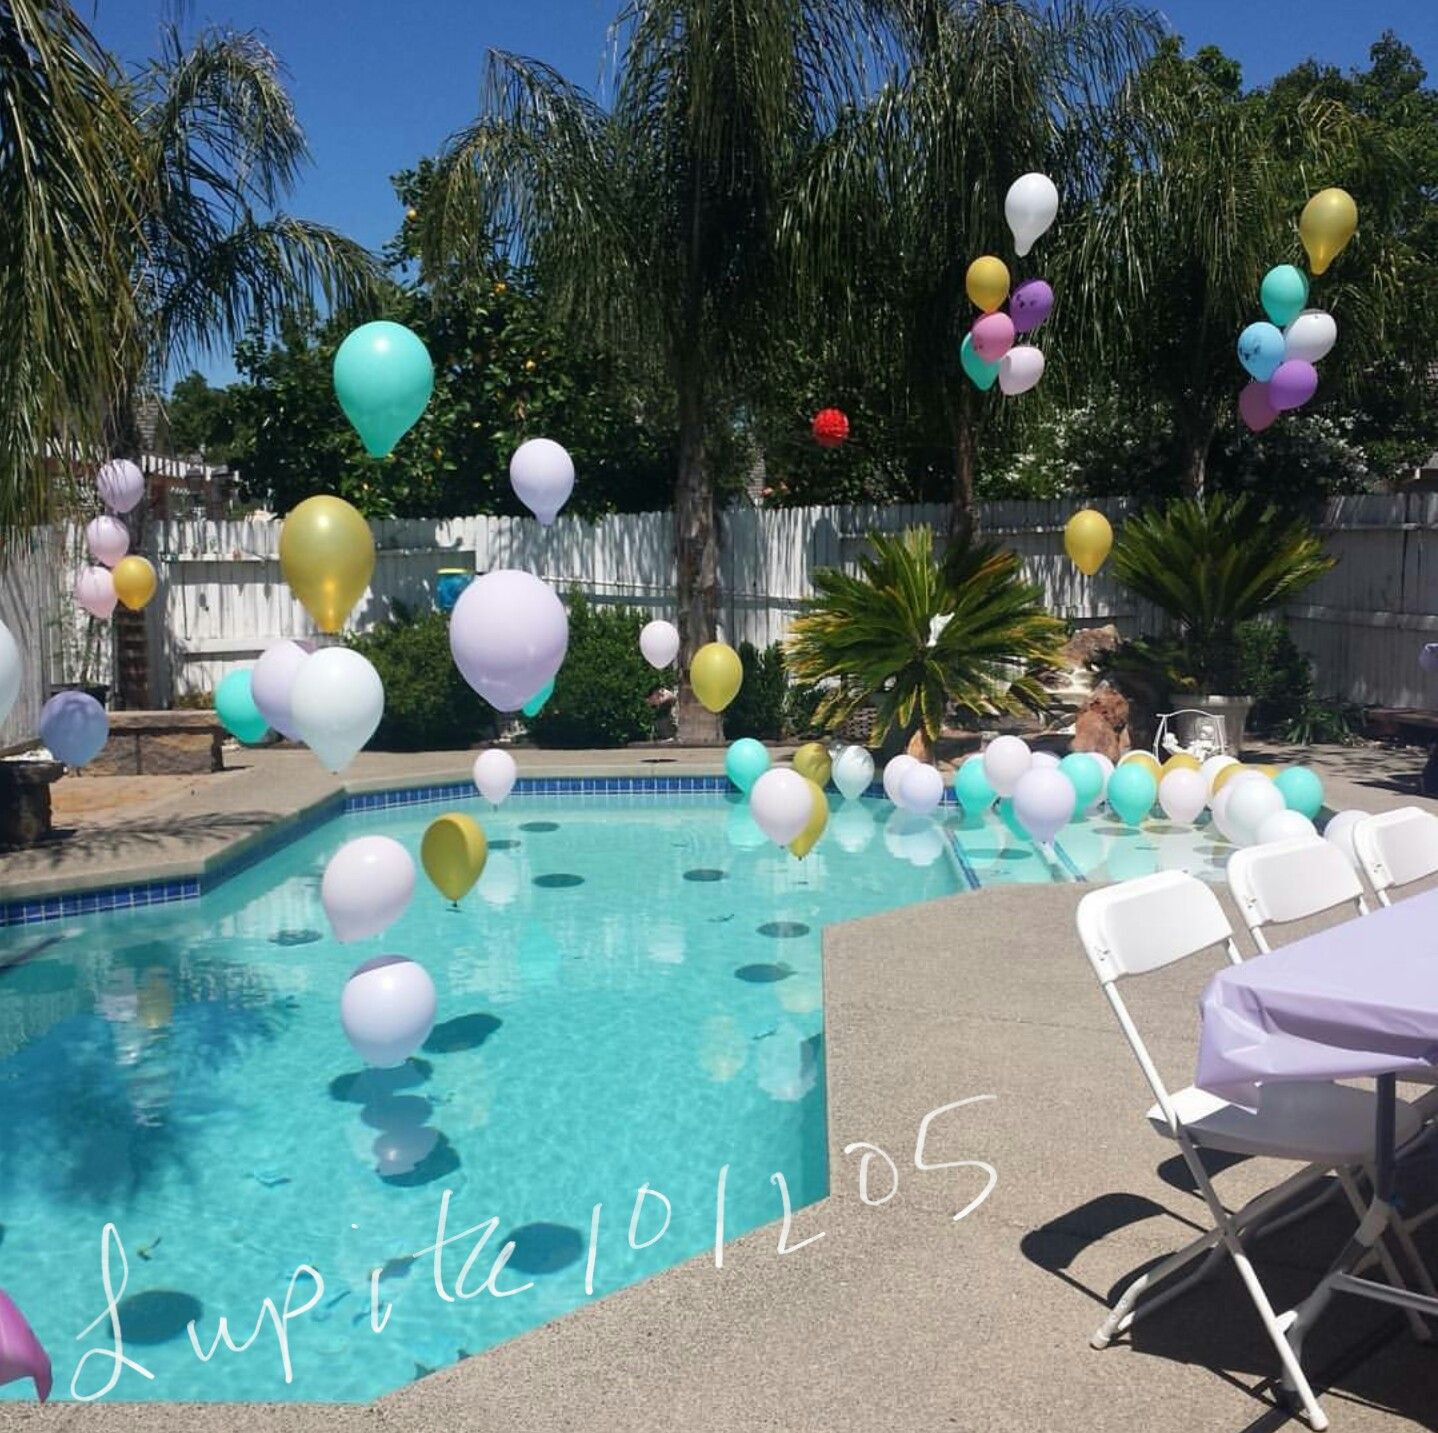 Pool Party Ideas For 16Th Birthday
 Pool party balloons sweet 16 in 2019